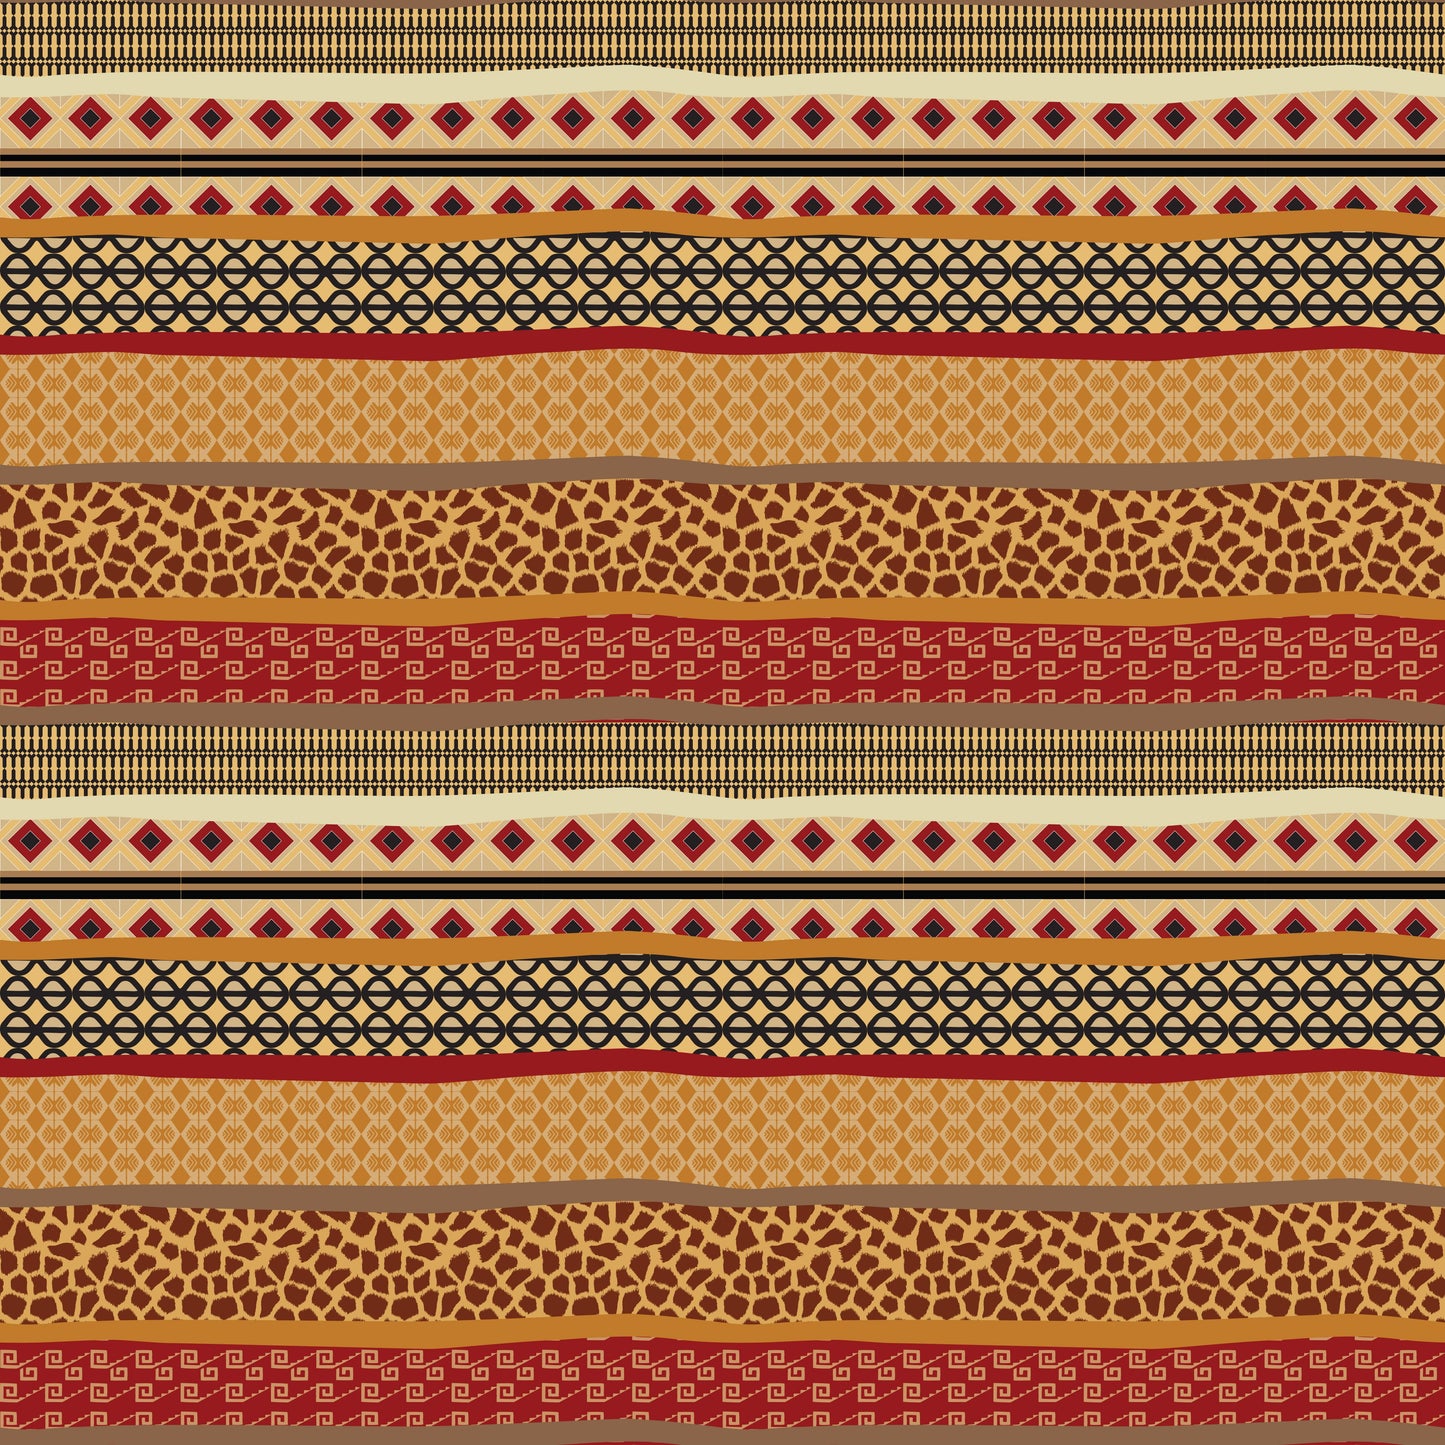 Tribal - Colorful Patterns 015